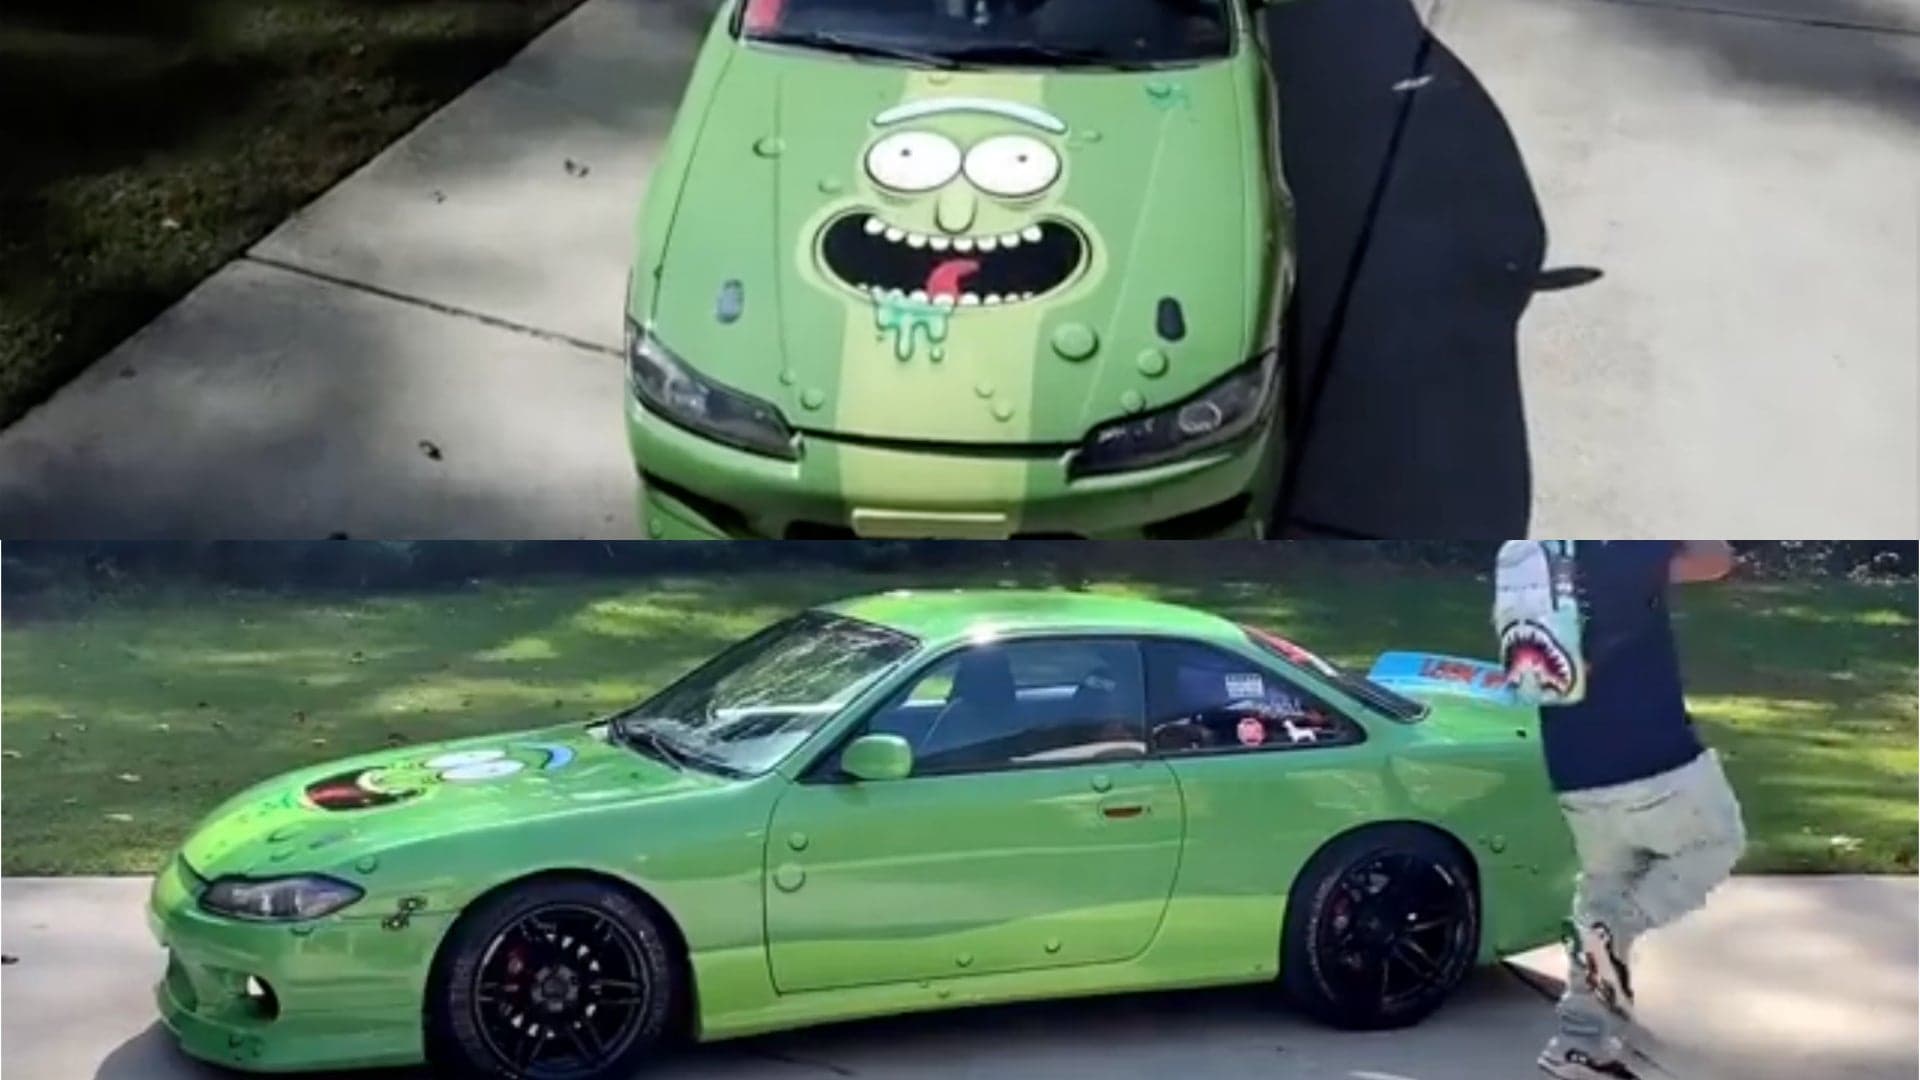 T-Pain Pays Homage to Rick and Morty With ‘Pickle Rick’ Themed Nissan Silvia Drift Car